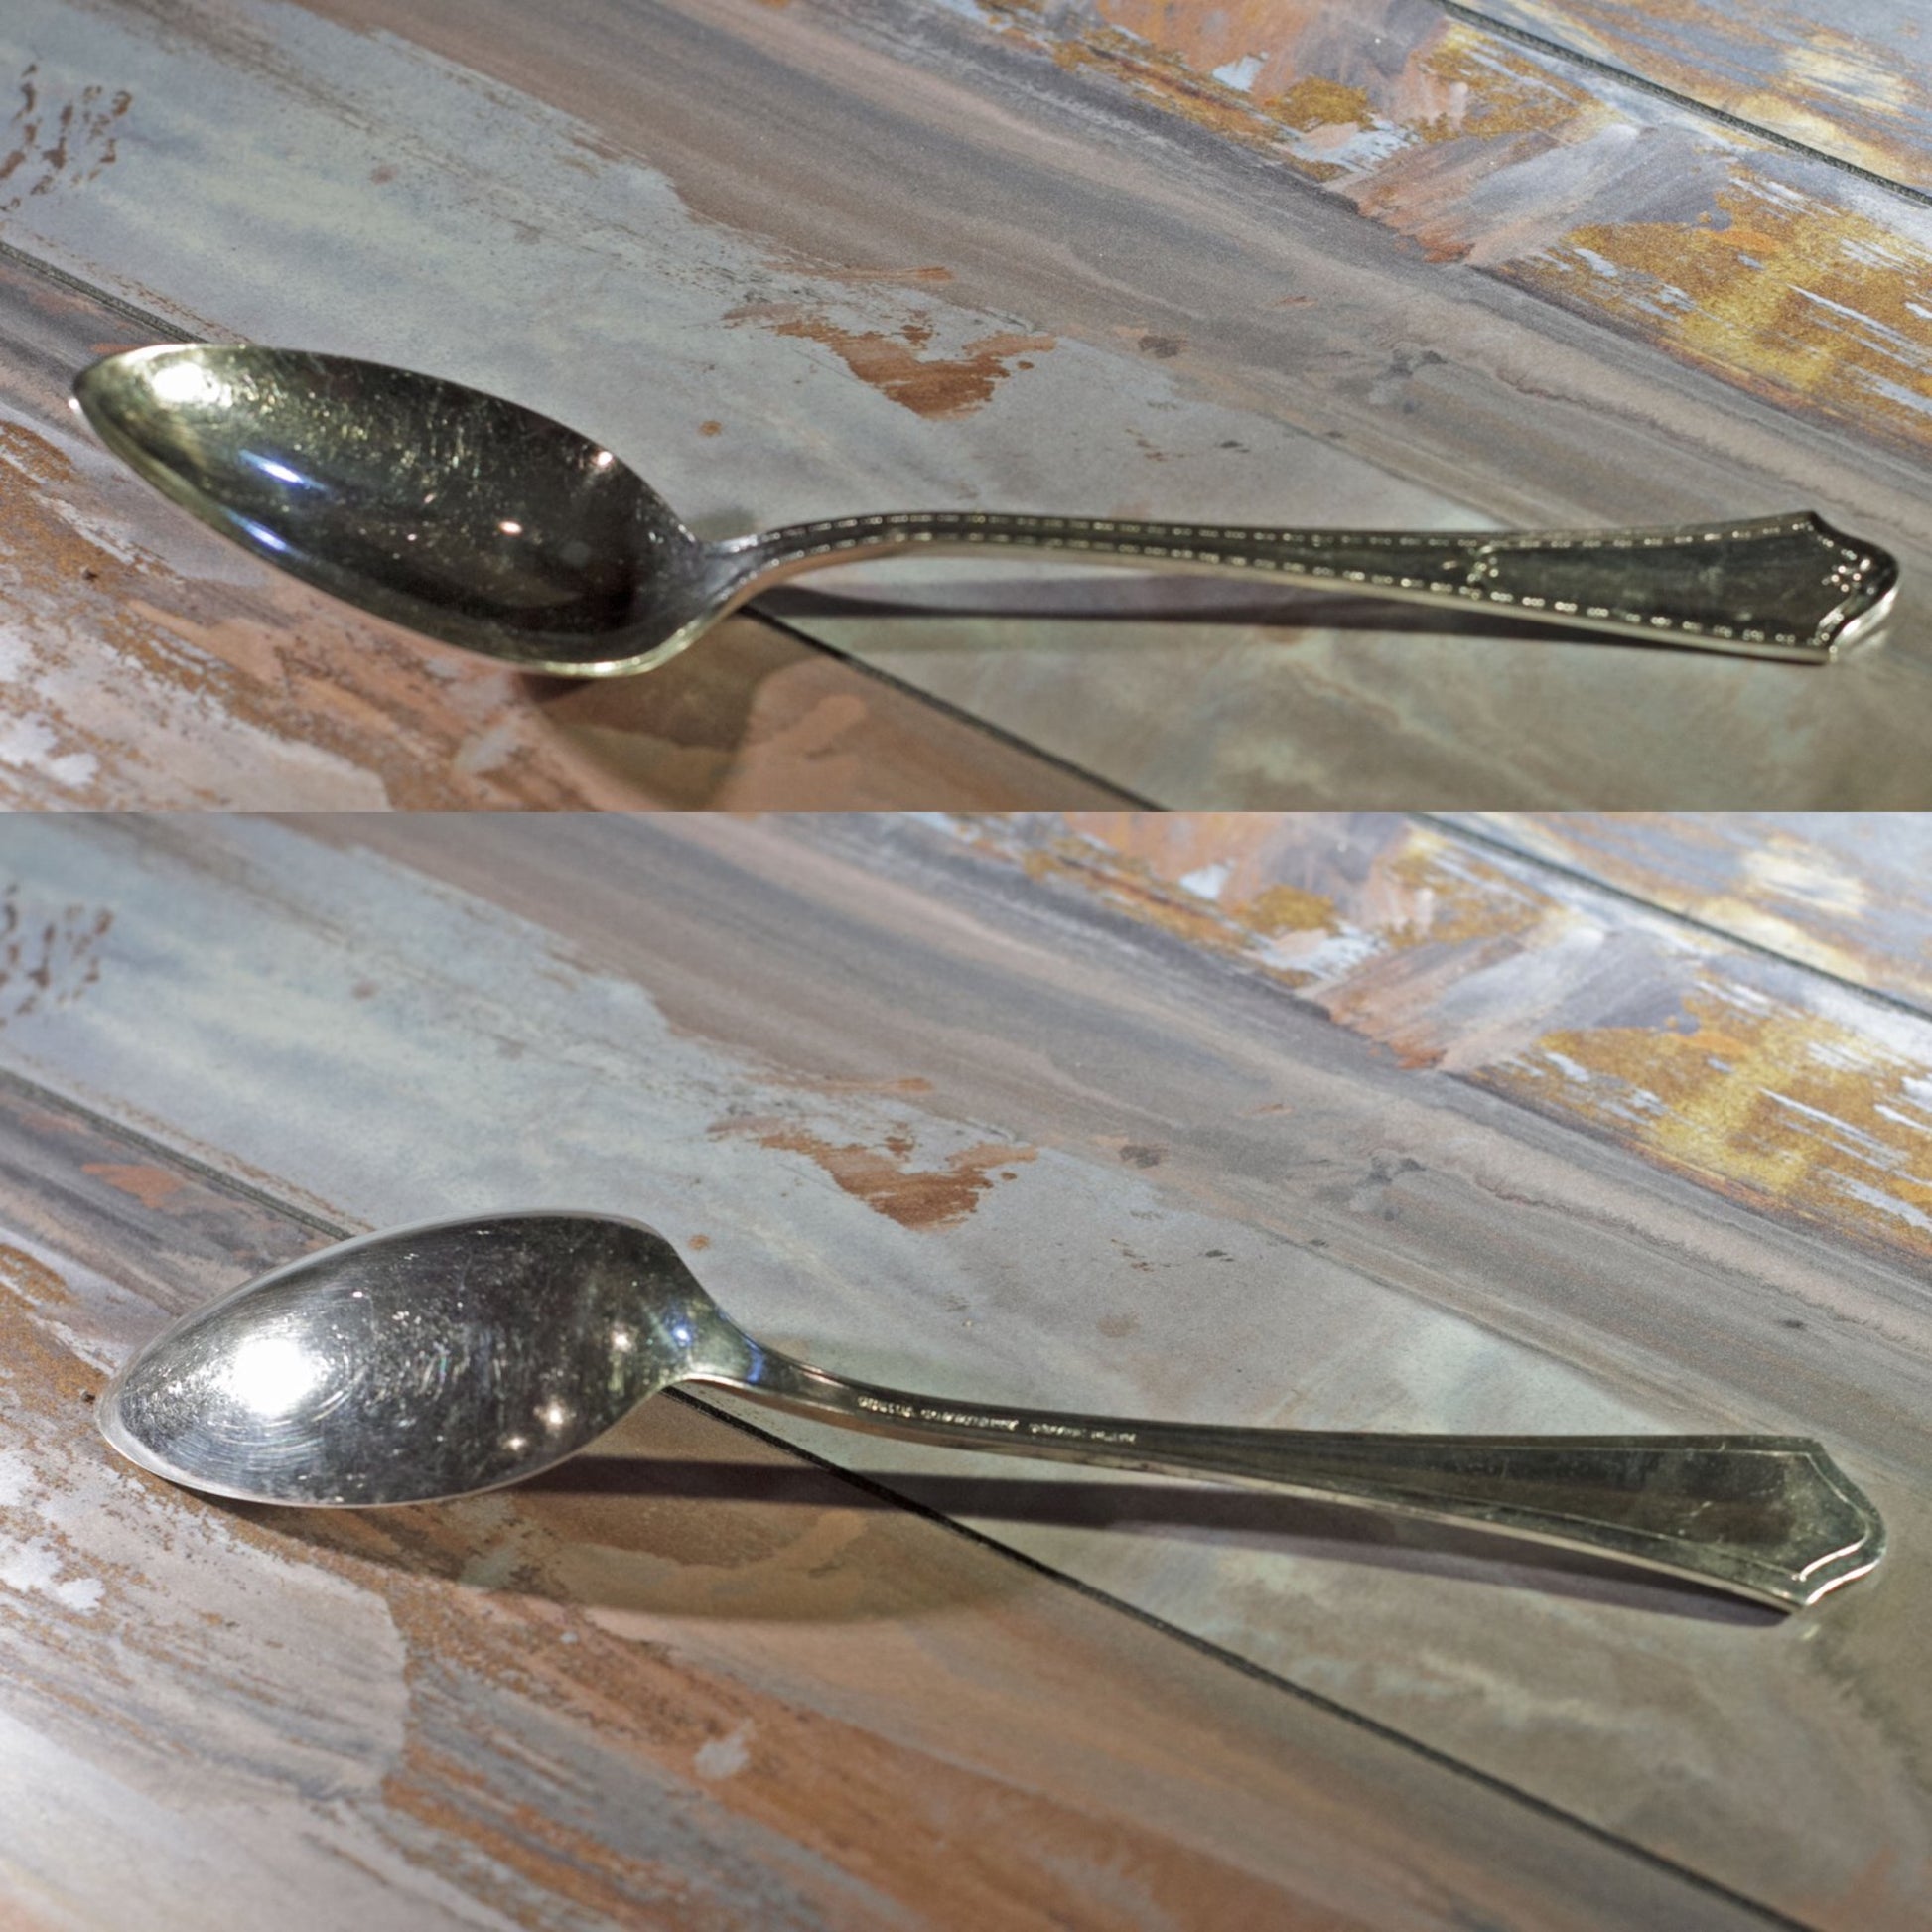 CHATAUQUA SILVER PLATE SERVING SPOON by Oneida Silver